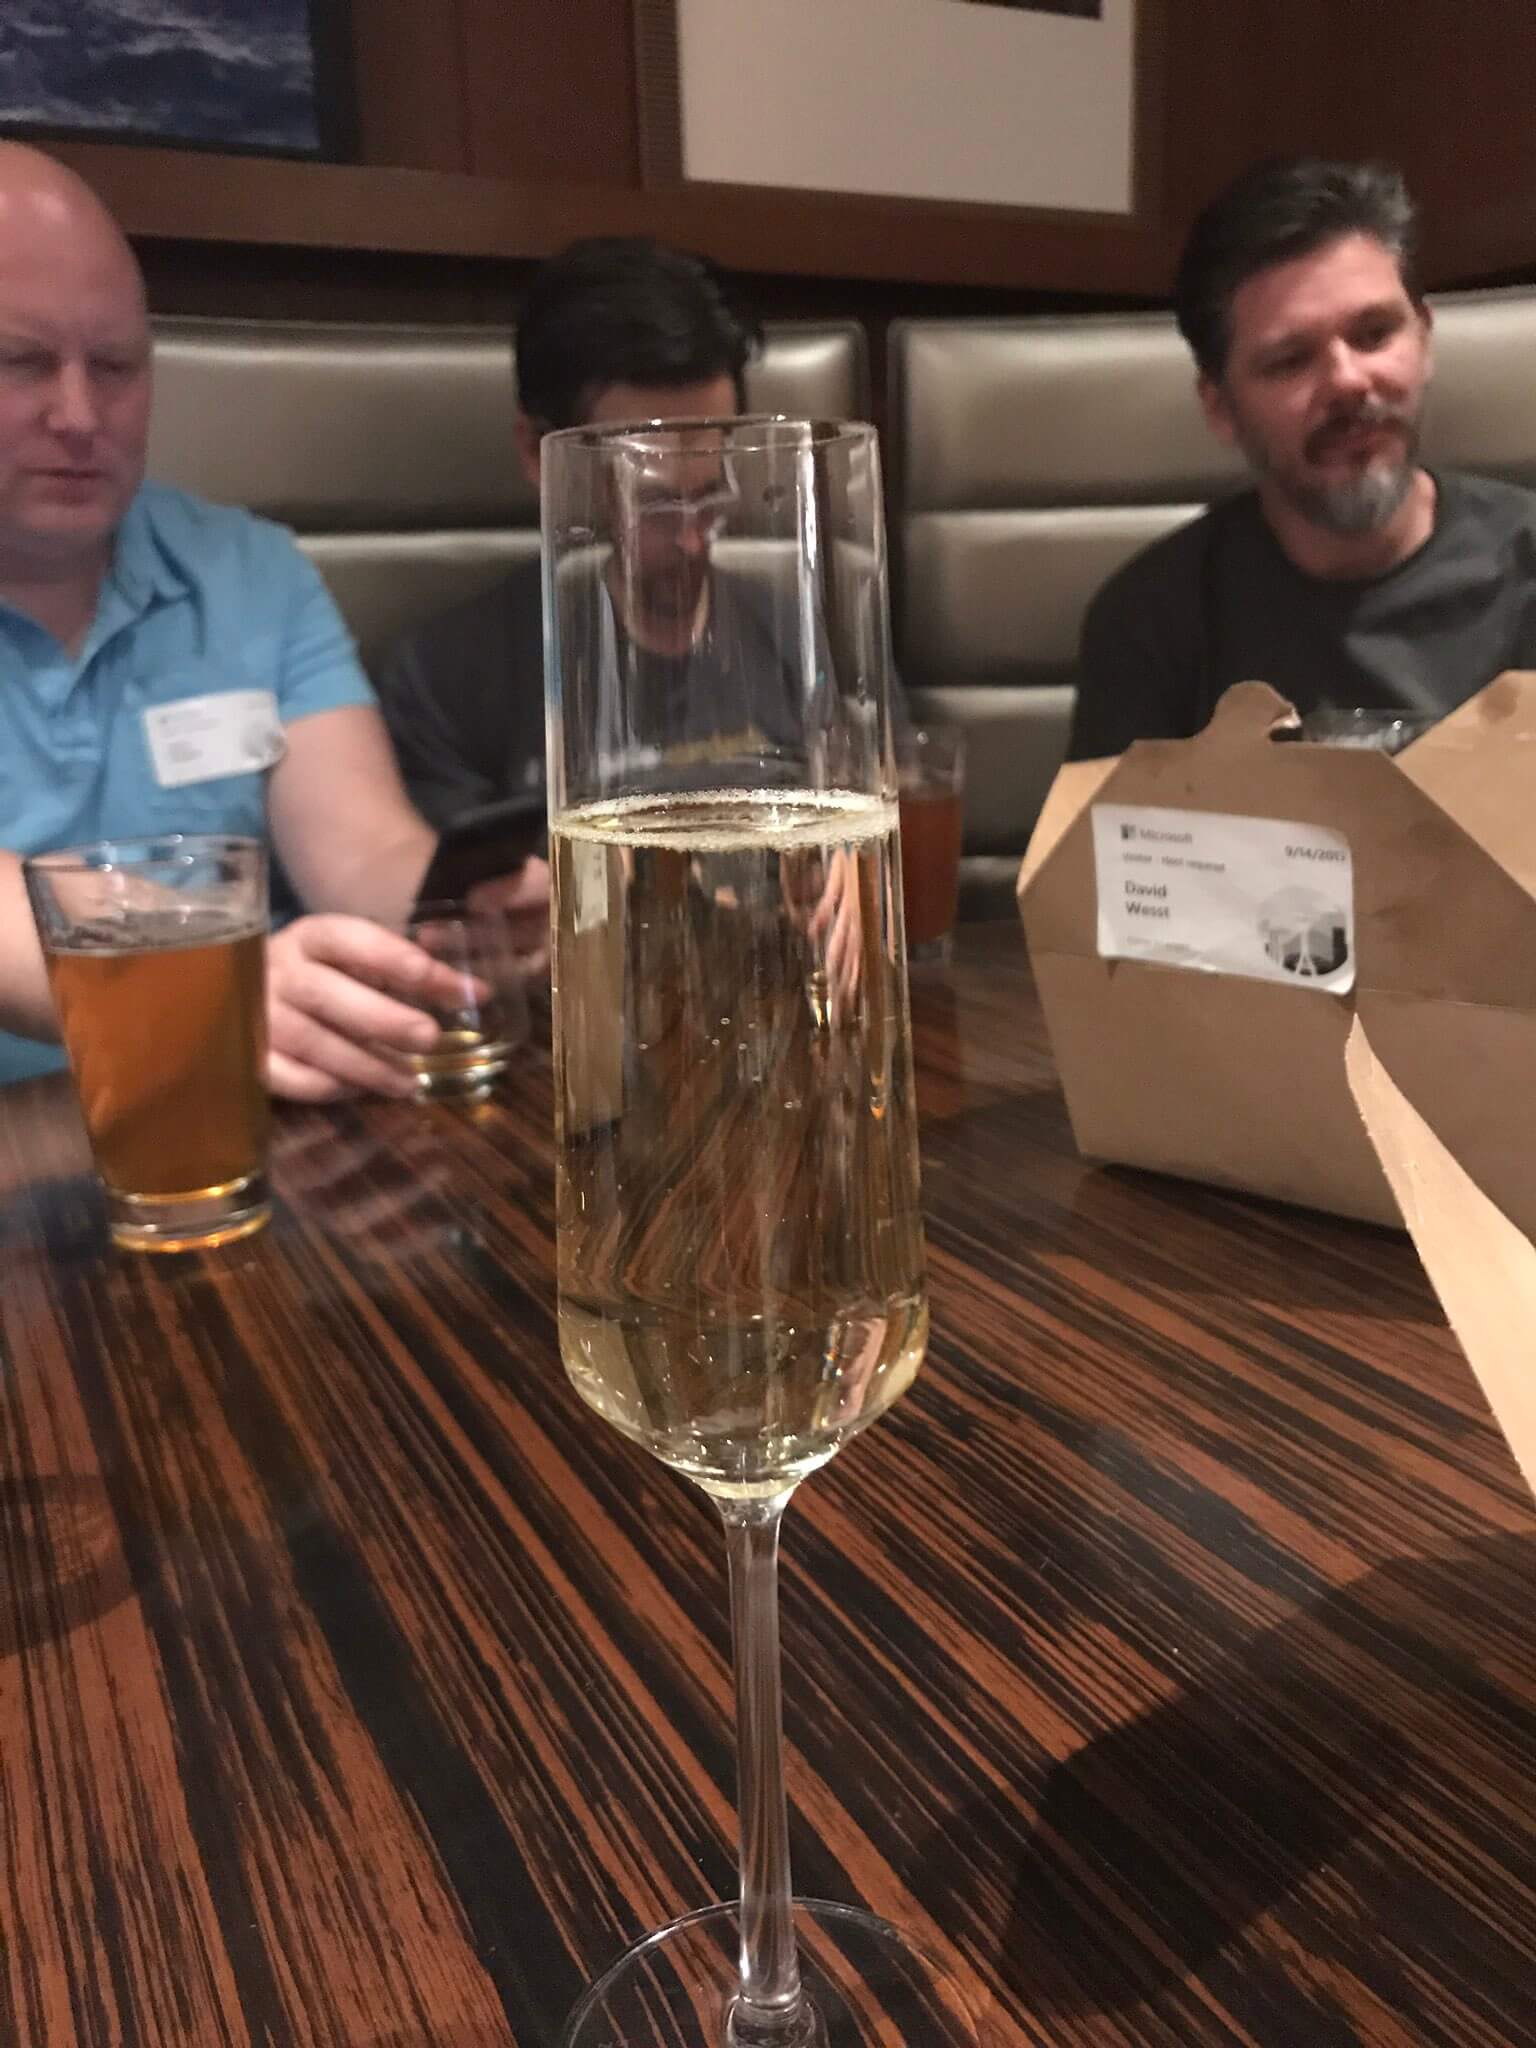 A mostly full Champagne flute in the foreground, a cardboard takeaway container behind it, and blurry people sitting in a booth in the background.